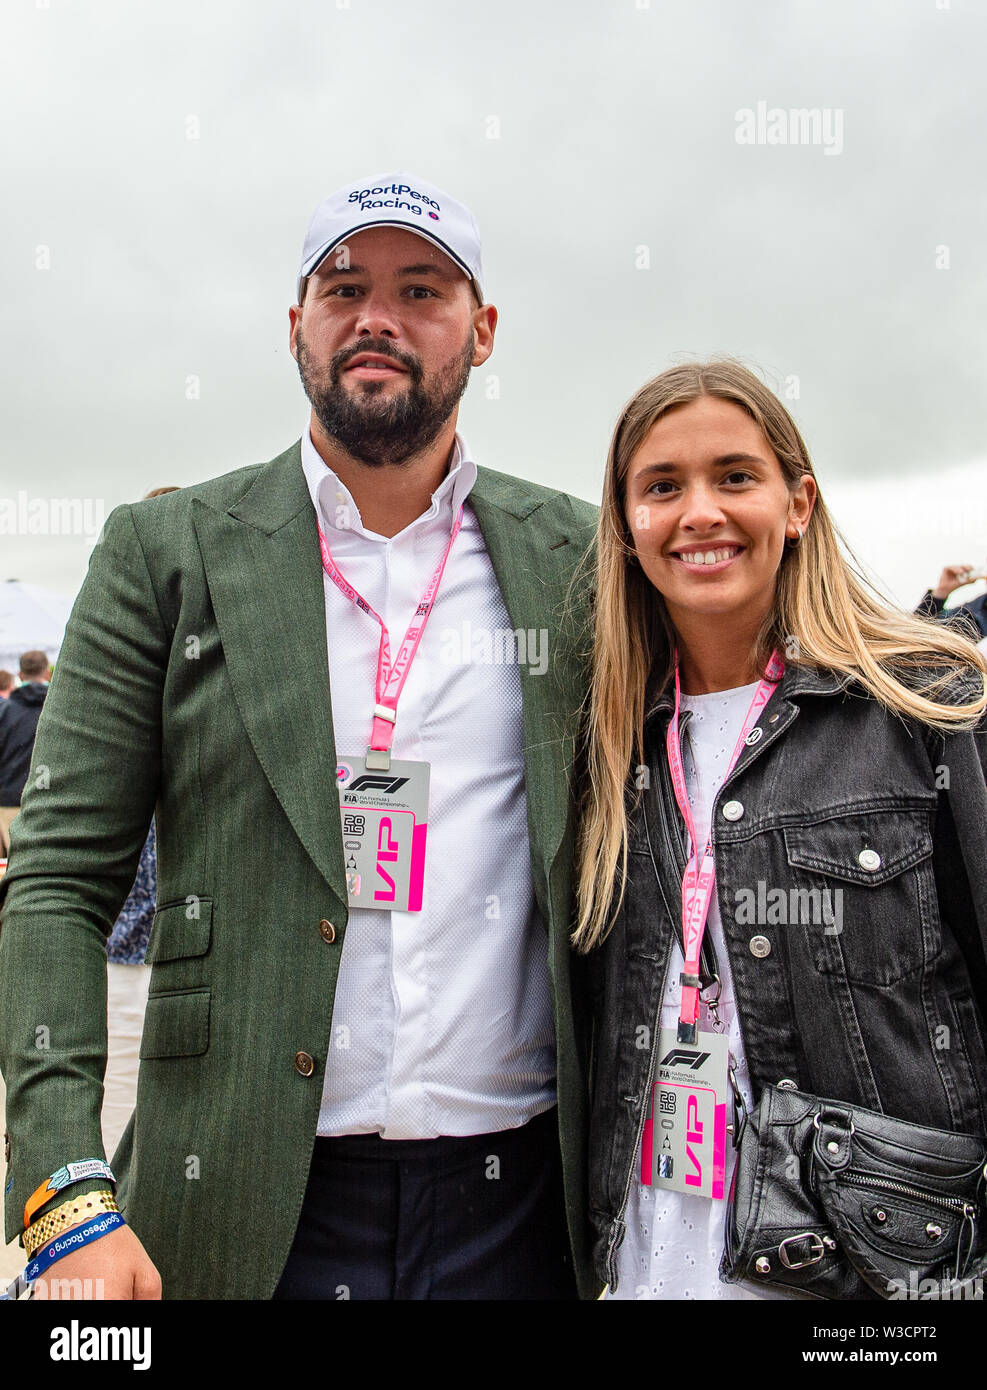 Towcester, United Kingdom. 14th July, 2019. Tony Bellew - Former professional boxer and commentator (left) takes selfie with his fan during Race Day of Formula 1 Rolex British Grand Prix 2019 at Silverstone Circuit on Sunday, July 14, 2019 in Towcester, ENGLAND. Credit: Taka G Wu/Alamy Live News Stock Photo